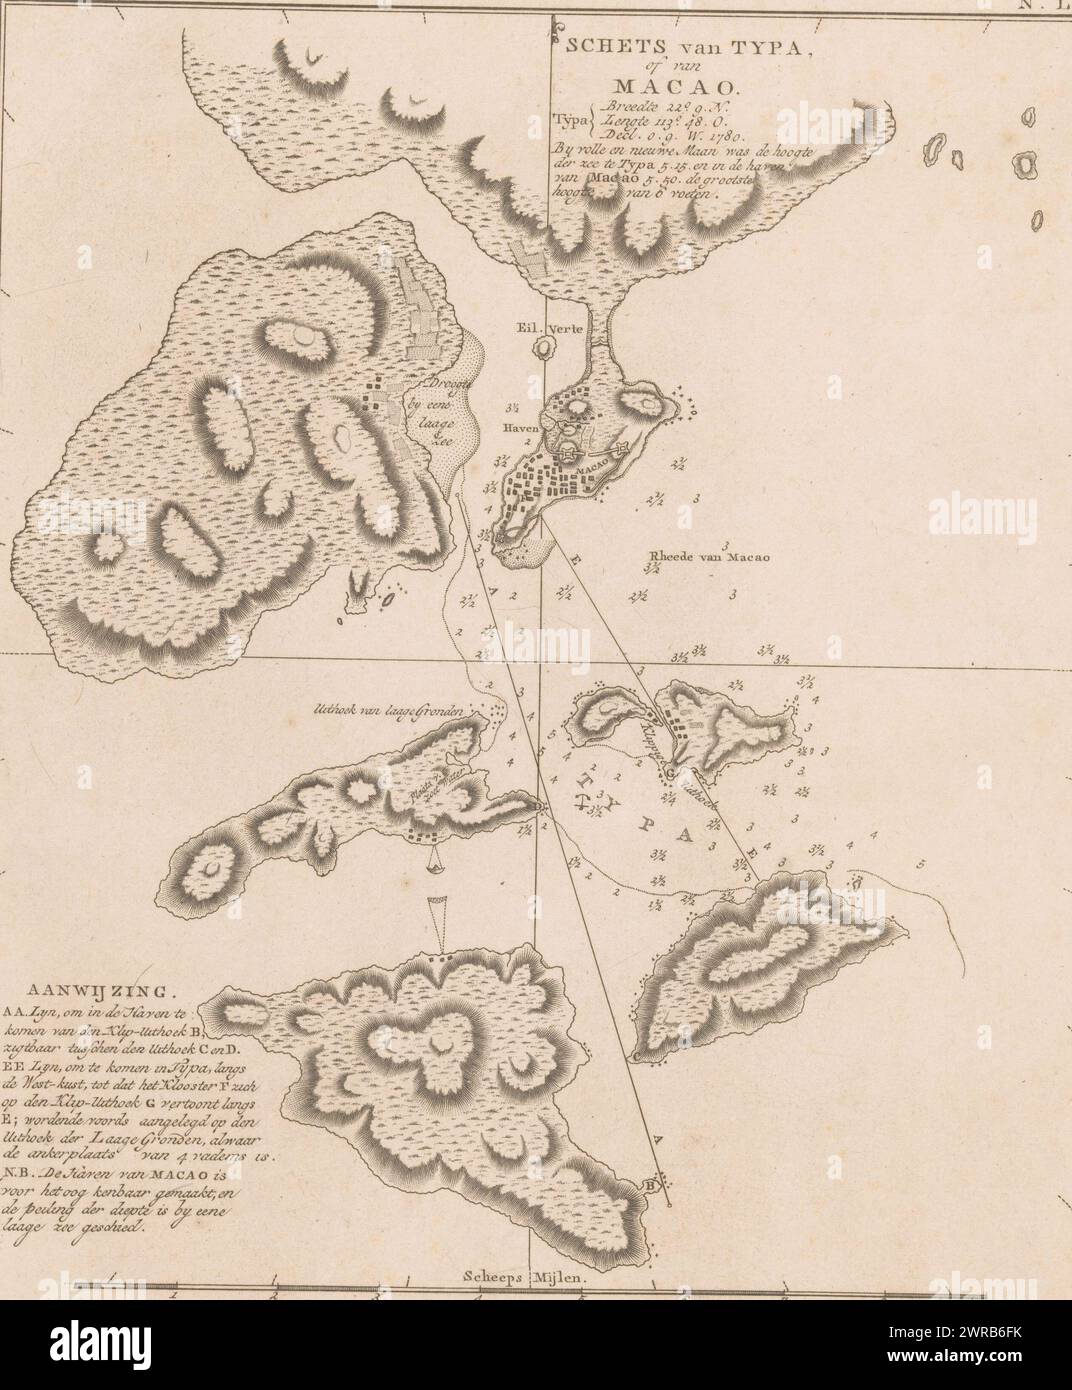 Map of Macao and surrounding islands, Sketch of Typa or of Macao (title on object), Depth measurements in the map image. A legend at the bottom left. Top right in the margin: 'No. LI**'., print maker: anonymous, after design by: William Bligh, (possibly), publisher: Abraham en Jan Honkoop, publisher: Leiden, publisher: Amsterdam, publisher: The Hague, c. 1803, paper, engraving, height 270 mm × width 227 mm, print Stock Photo